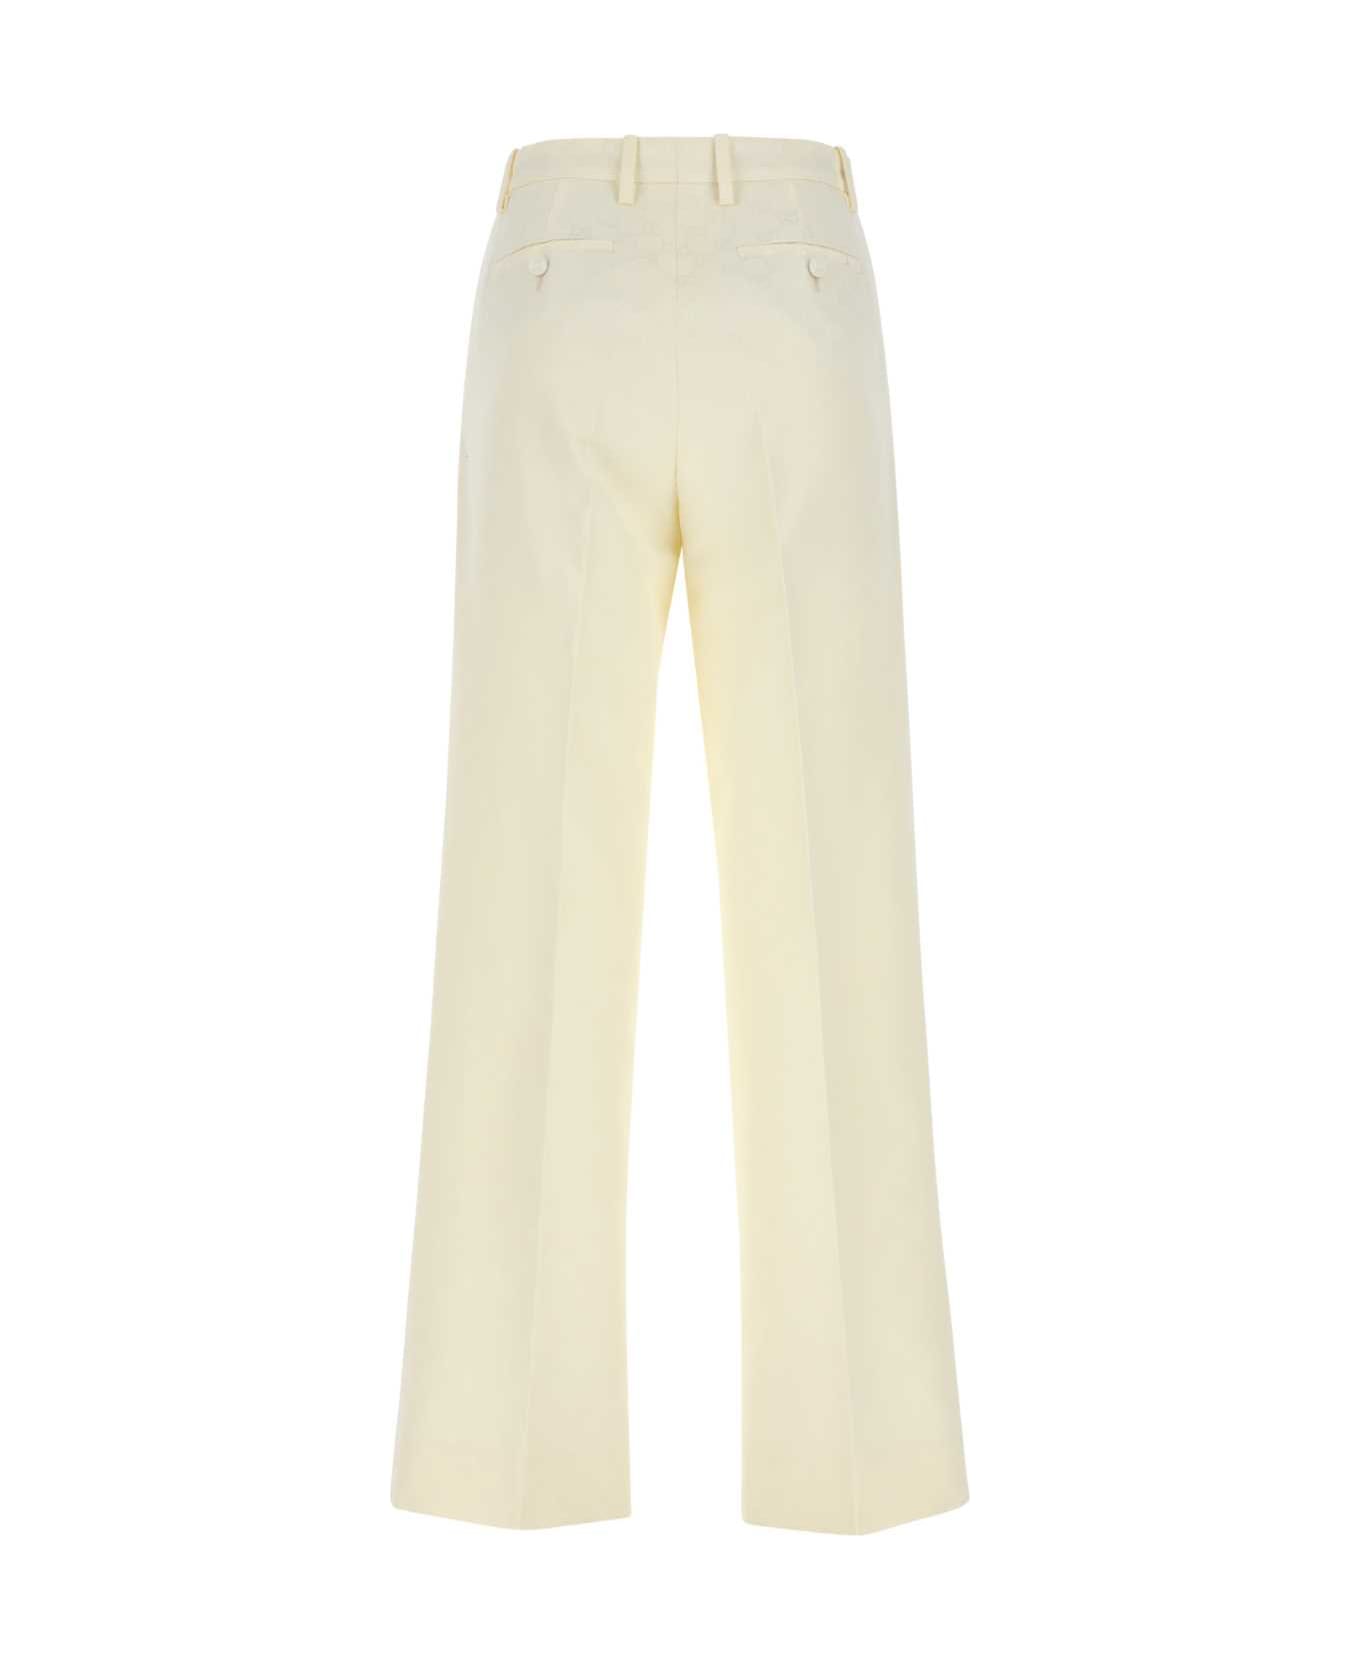 Gucci Embroidered Cotton Blend Wide-leg Pant - Beige ボトムス